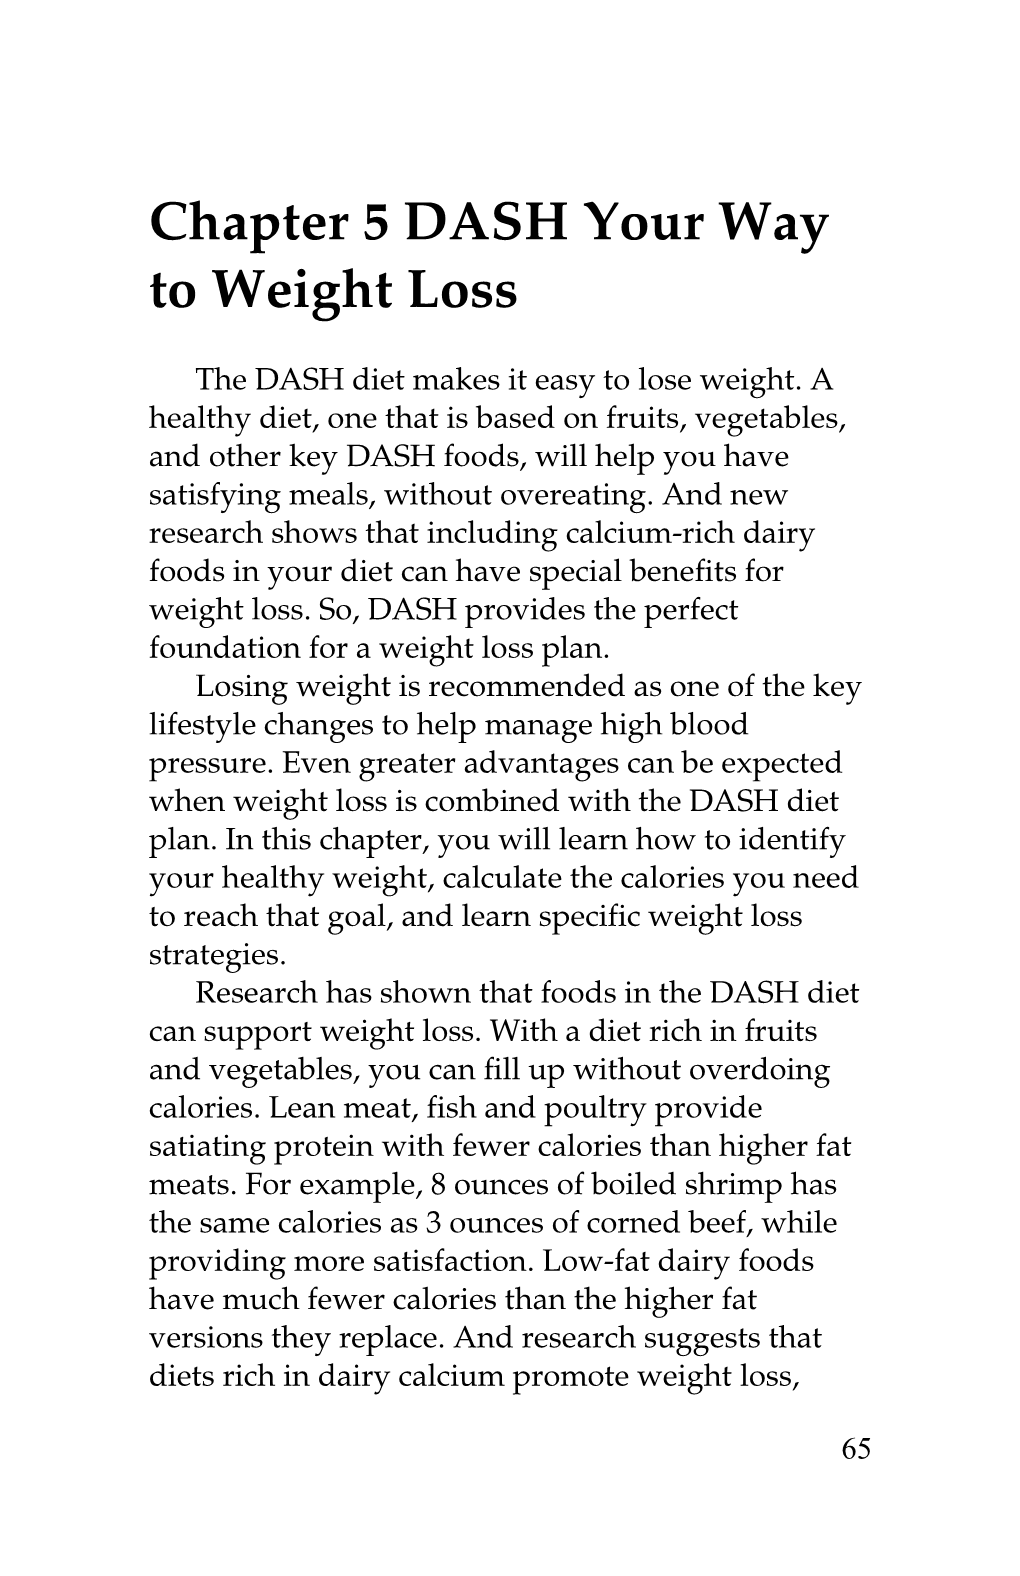 Chapter 5 DASH Your Way to Weight Loss